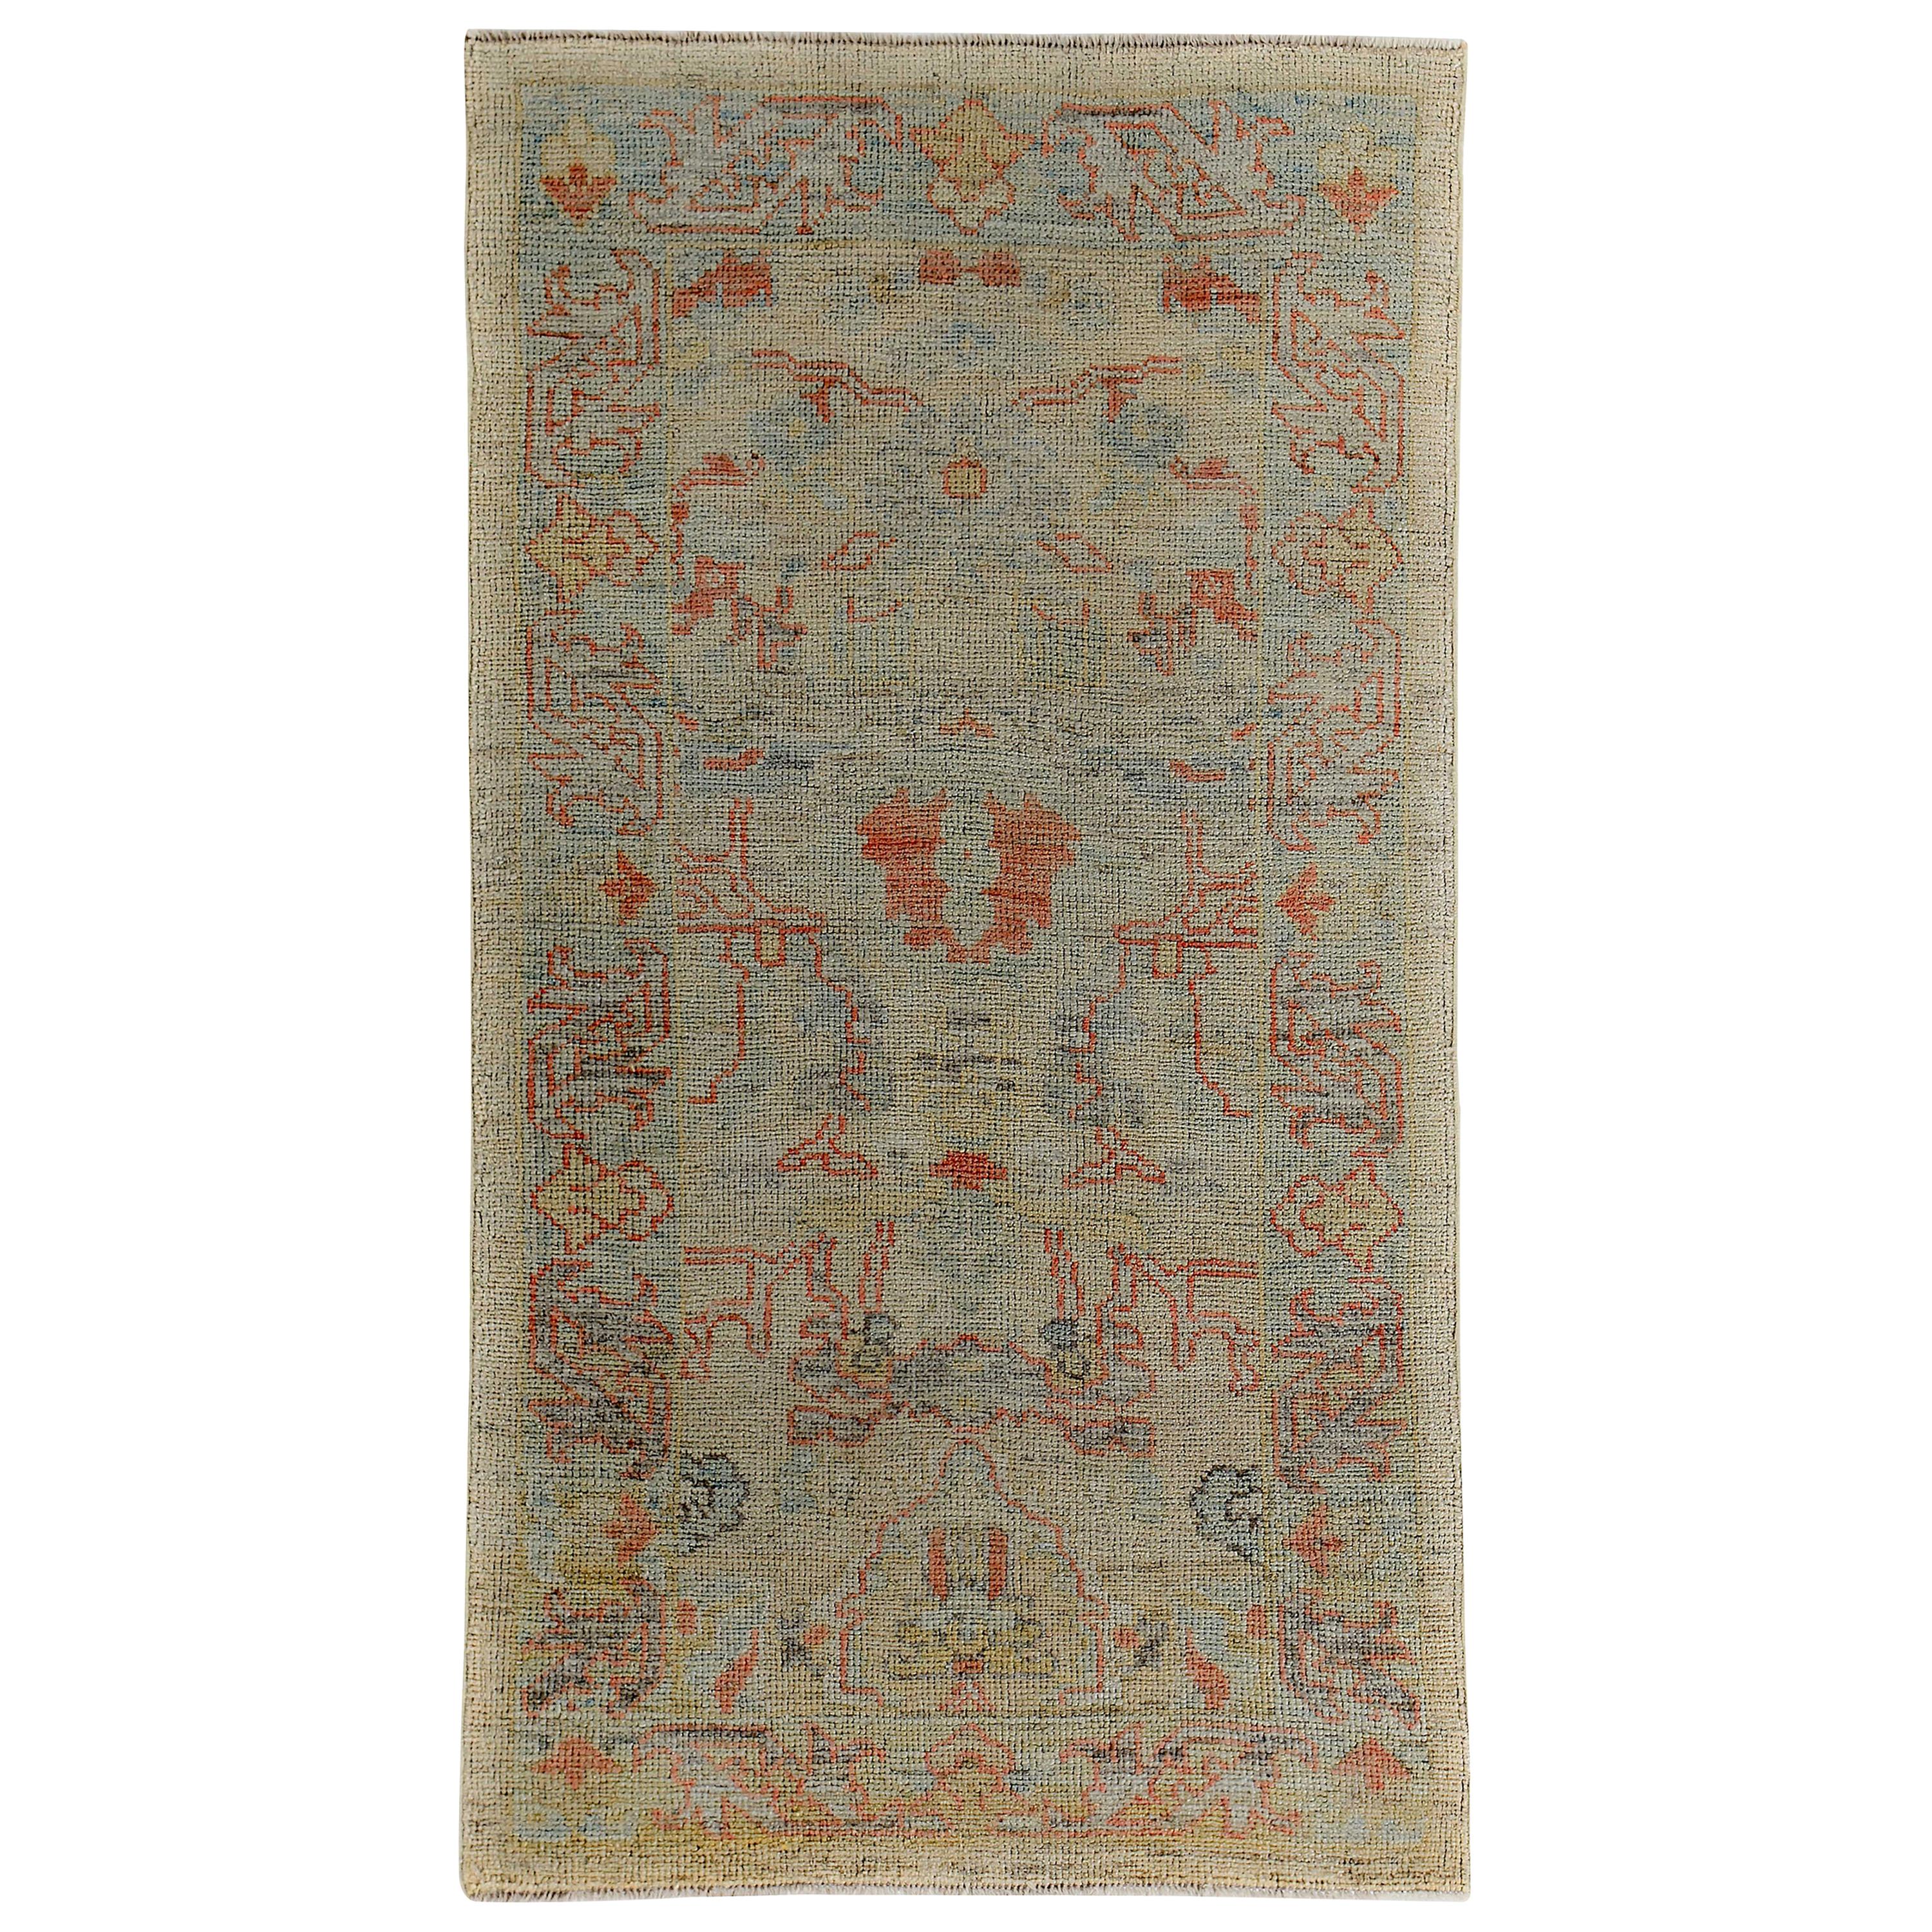 Turkish Oushak Rug with Blue and Rust Floral Details on Ivory Field